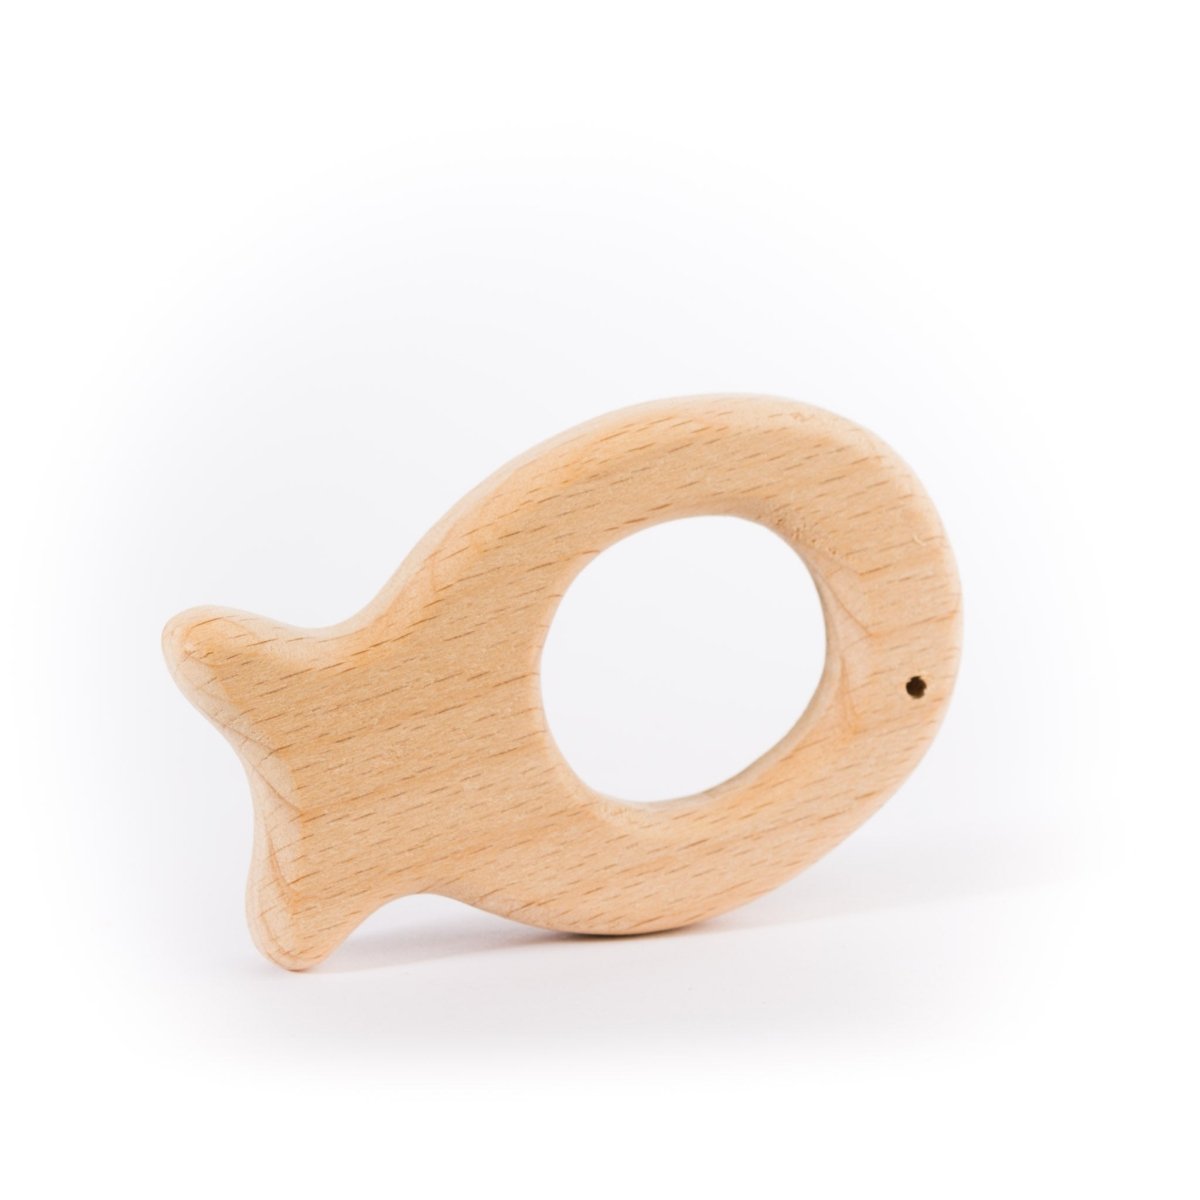 Wood Rings & Pendants Small - Beech Wood Fish from Cara & Co Craft Supply